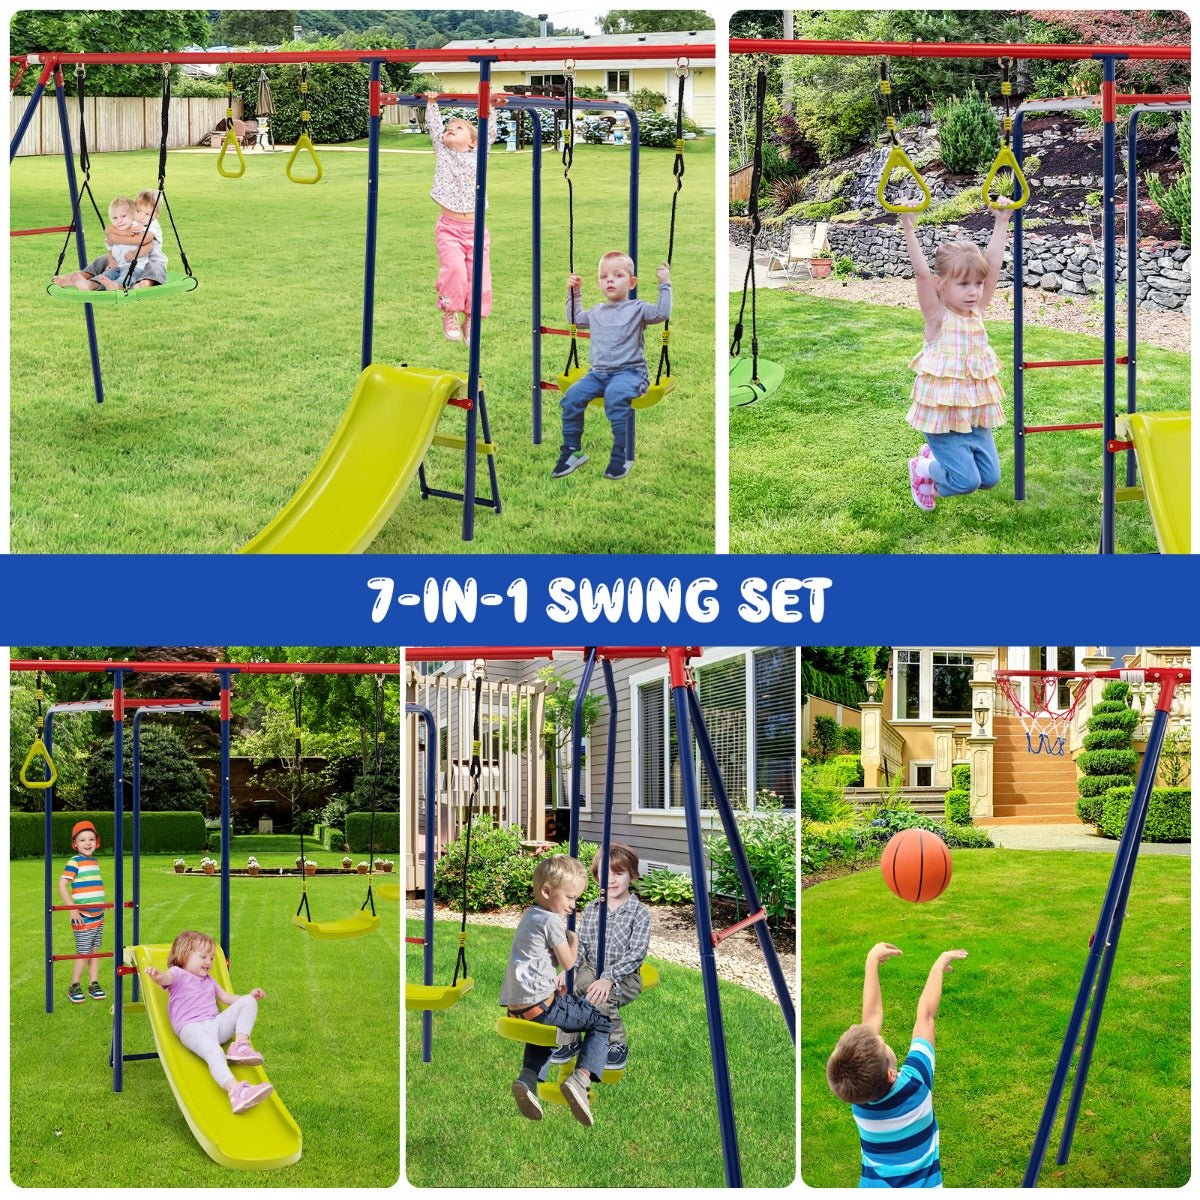 Expandable 7-in-1 Swing Set with Ground Stakes: Enjoy Every Moment